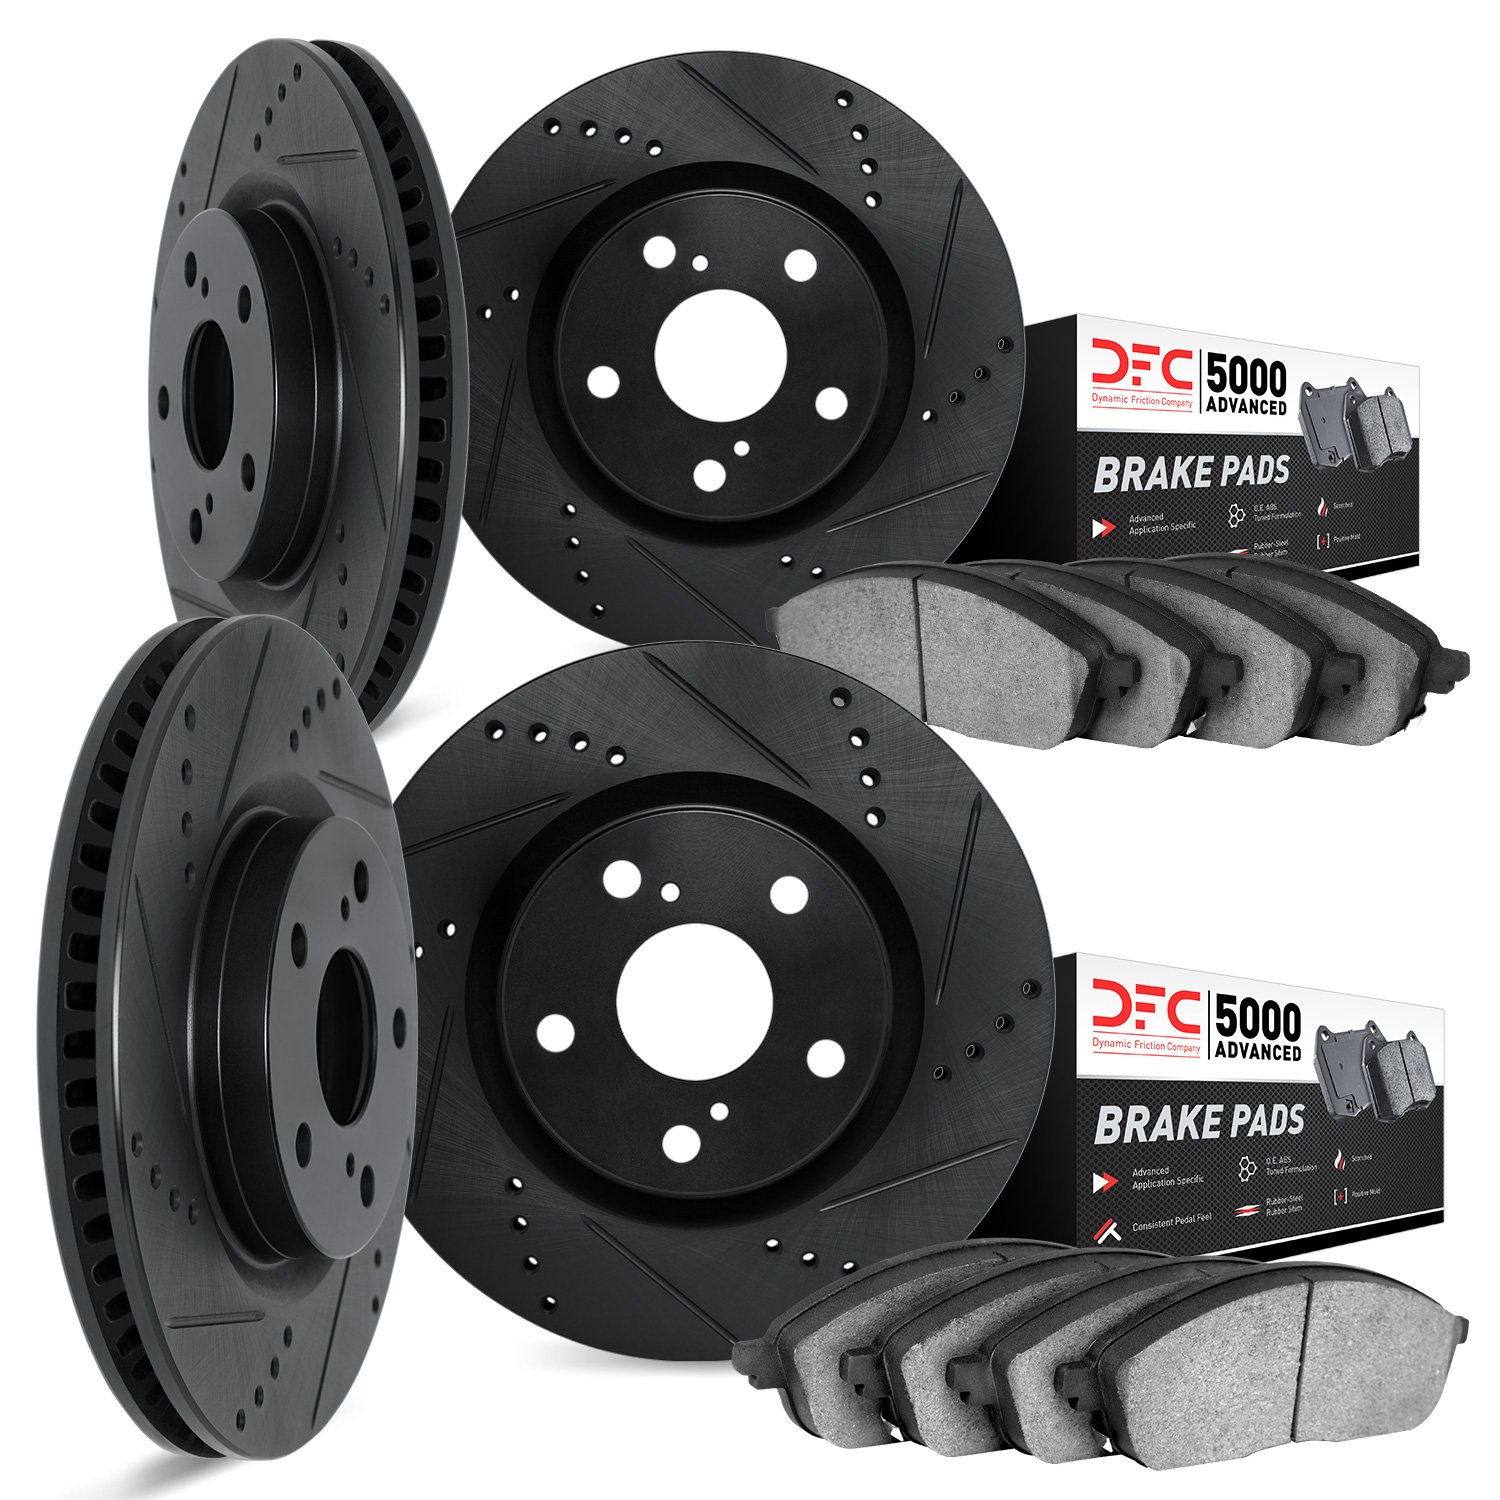 8504-75026 Drilled/Slotted Brake Rotors w/5000 Advanced Brake Pads Kit [Black], Fits Select Lexus/Toyota/Scion, Position: Front